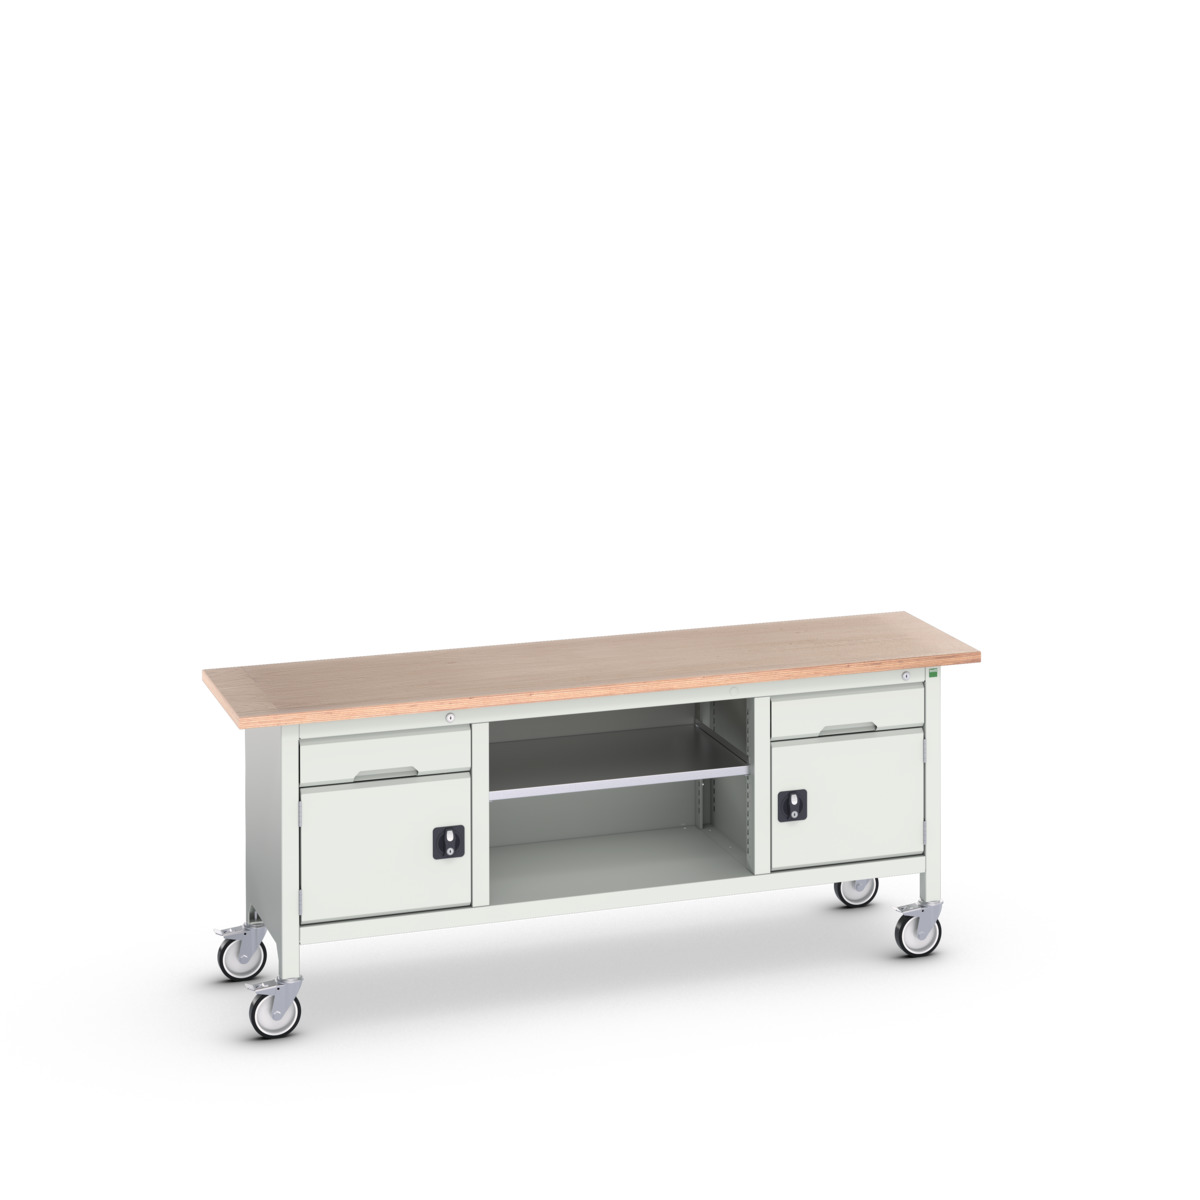 16923231.16 - verso mobile storage bench (mpx)